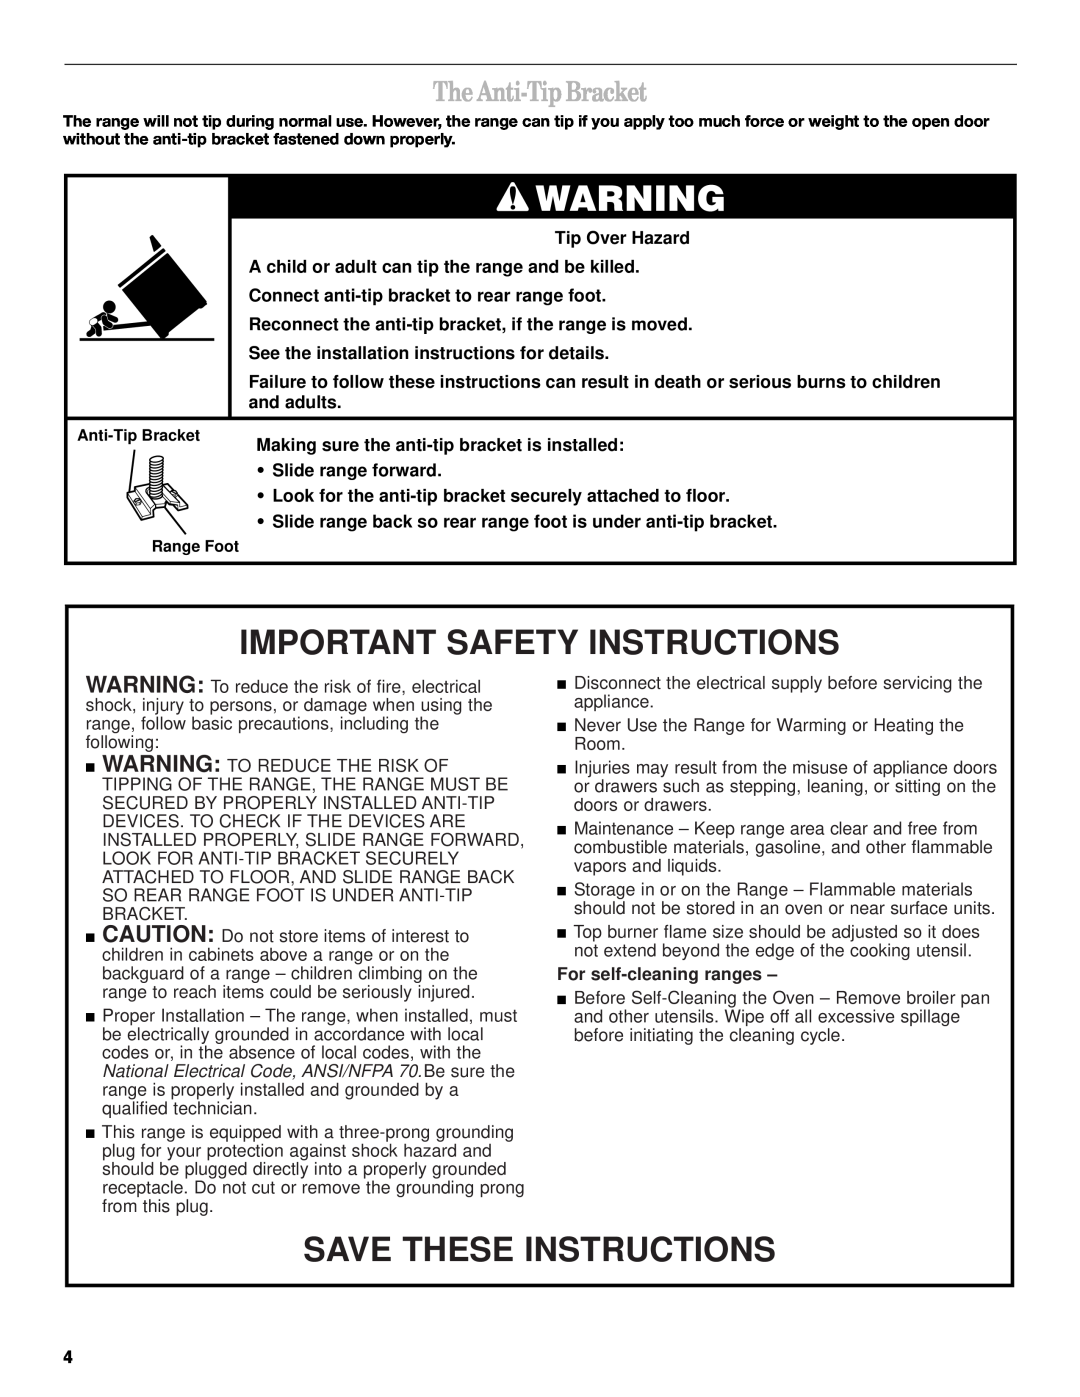 Whirlpool SF340BEH The Anti-Tip Bracket, Important Safety Instructions, Save These Instructions, For self-cleaning ranges 